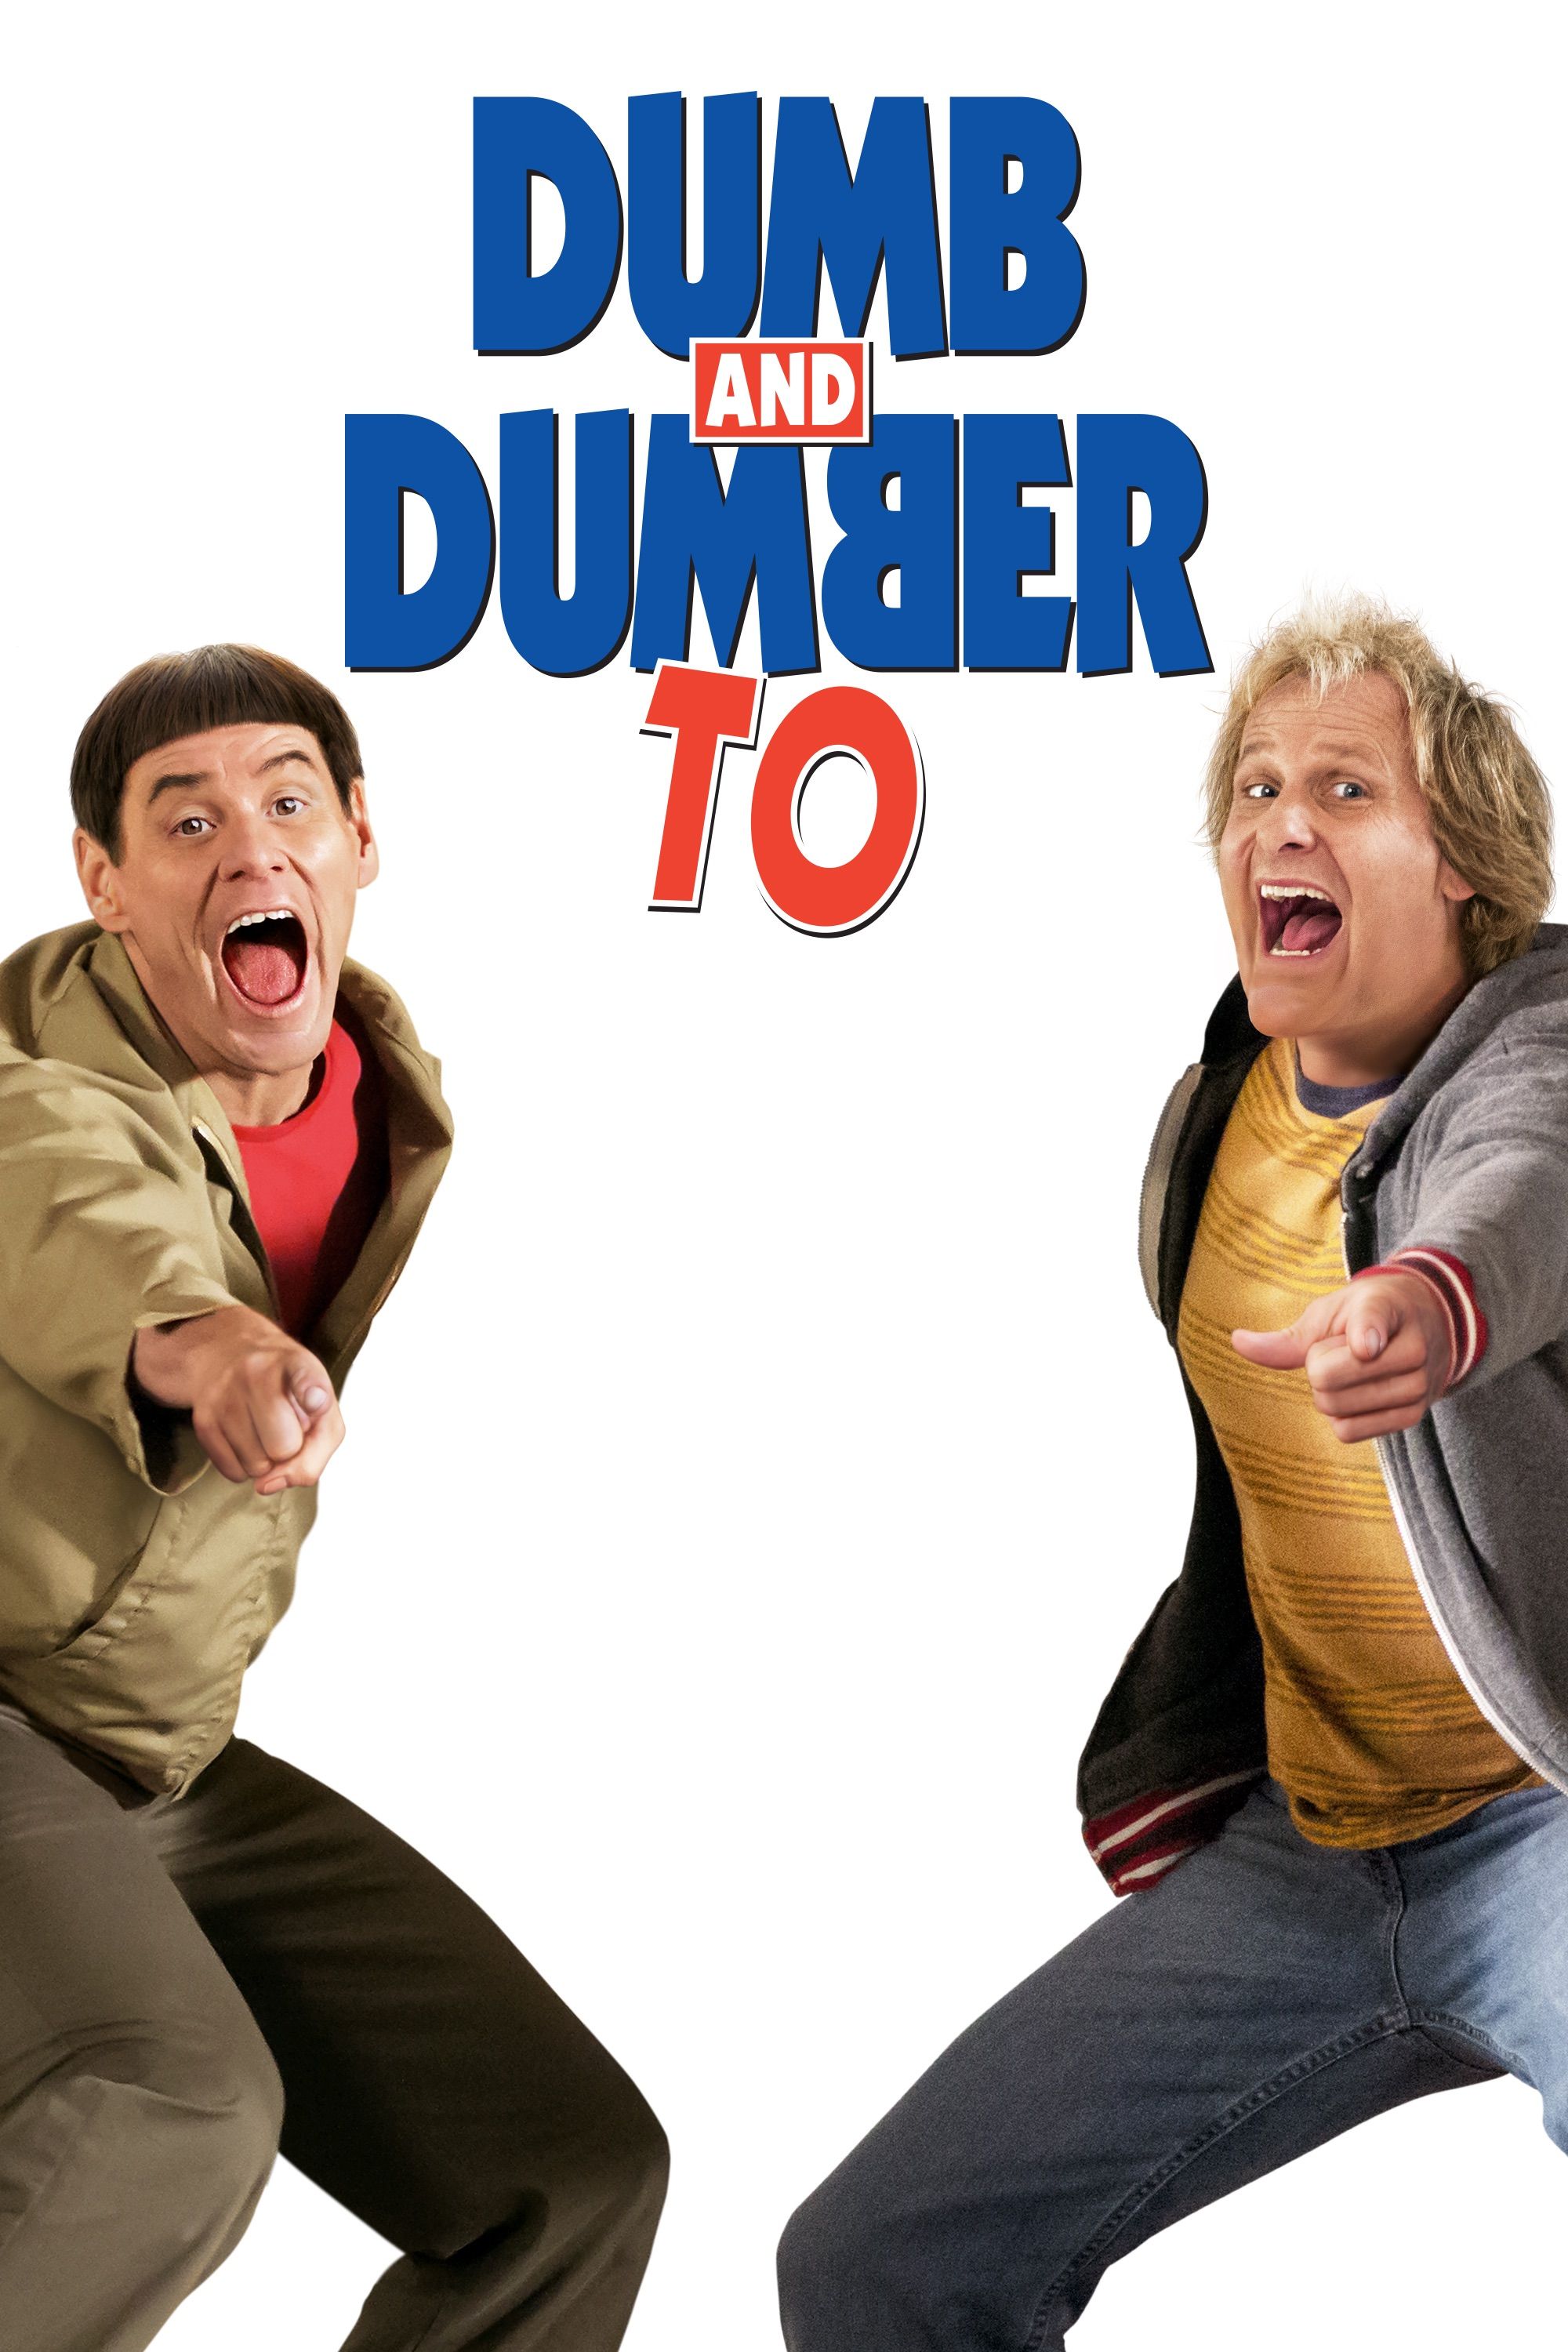 andre whitely recommends dumb and dumber download pic